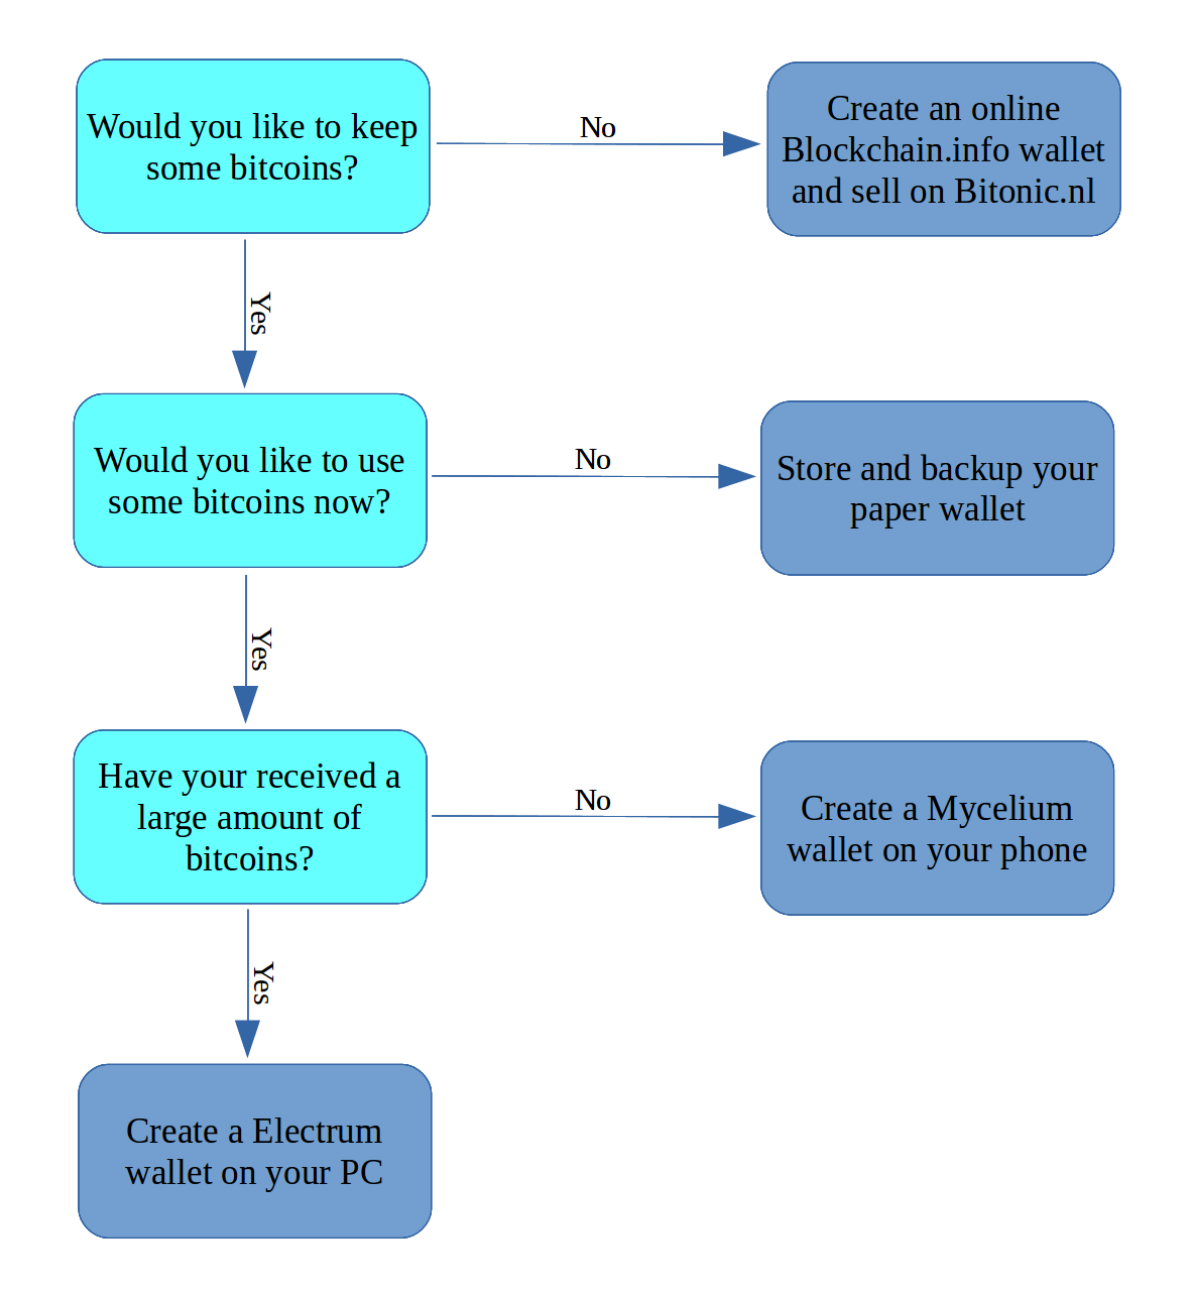 Decision tree for your paper wallet